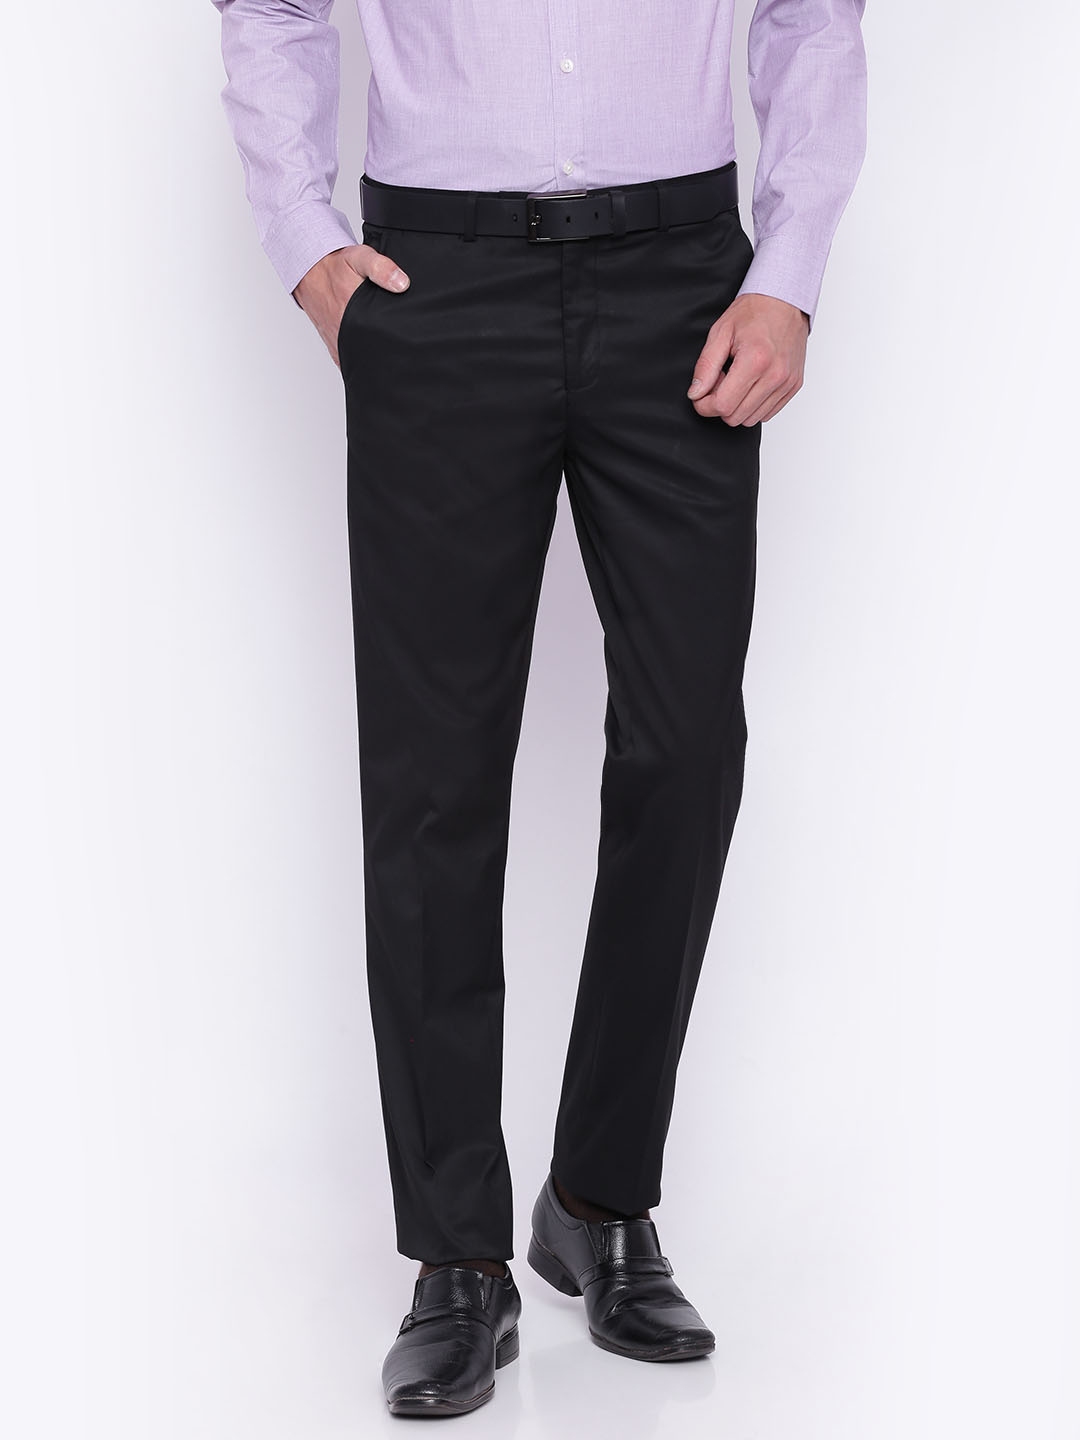 Buy CODE By Lifestyle Grey Flexi Waist Regular Fit Formal Trousers   Trousers for Men 1140493  Myntra